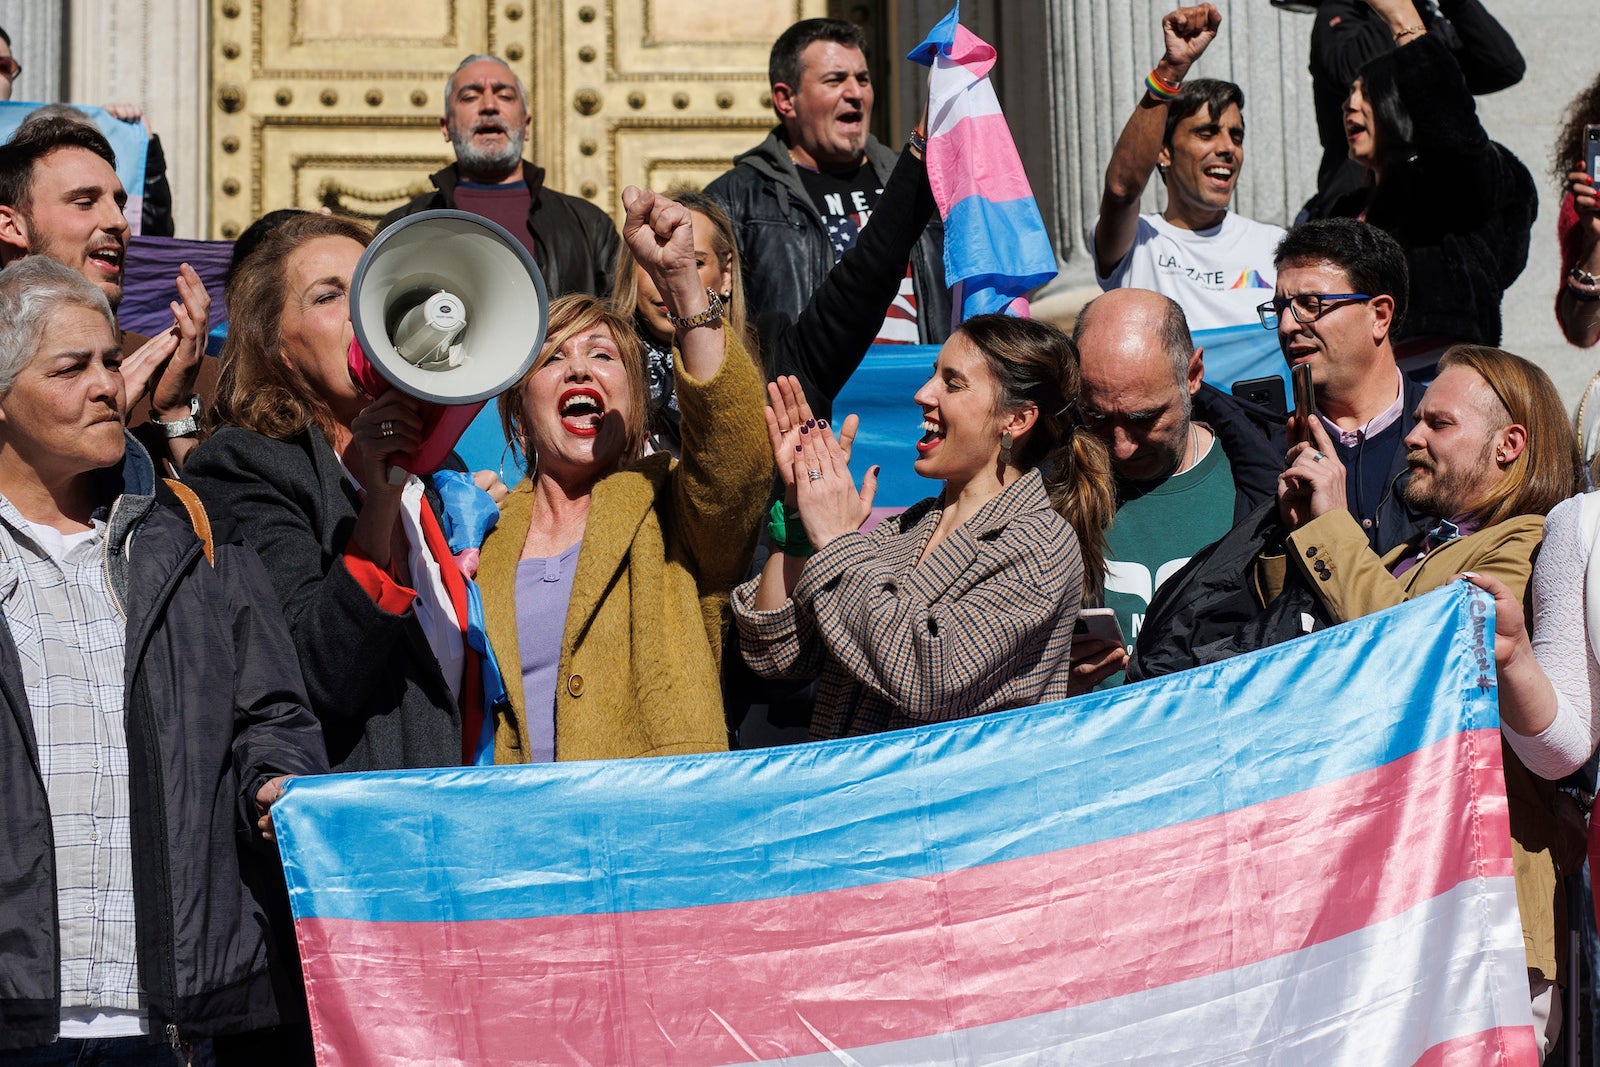 Spain’s Minister of Equality, Irene Montero, and LGBTI activists celebrate the passage of the “Trans Law” on the steps of the Congress of Deputies.